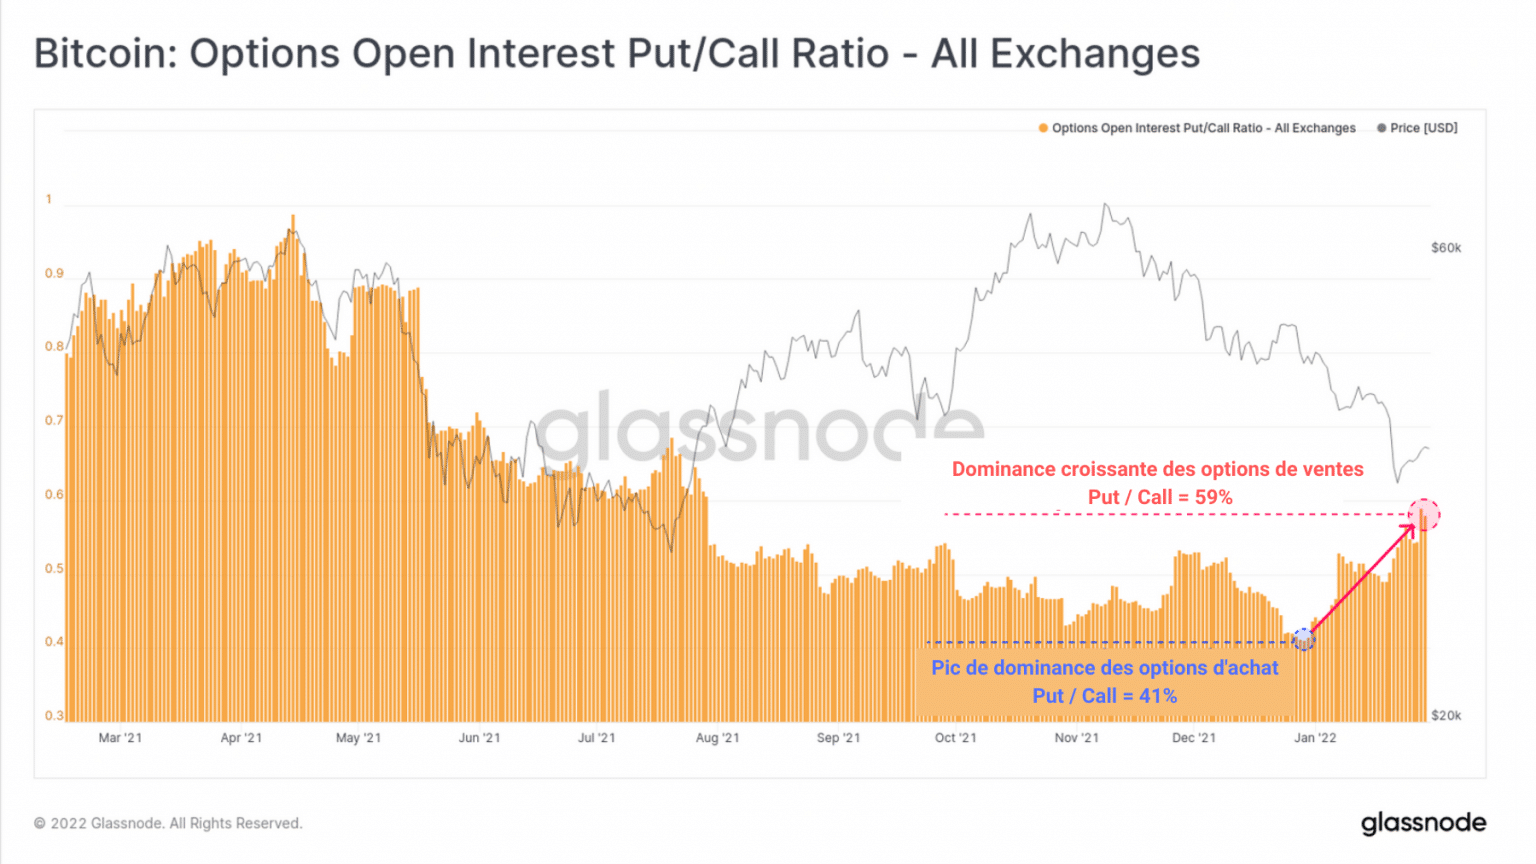 Graph of the dominance of the put/call option ratio on bitcoin